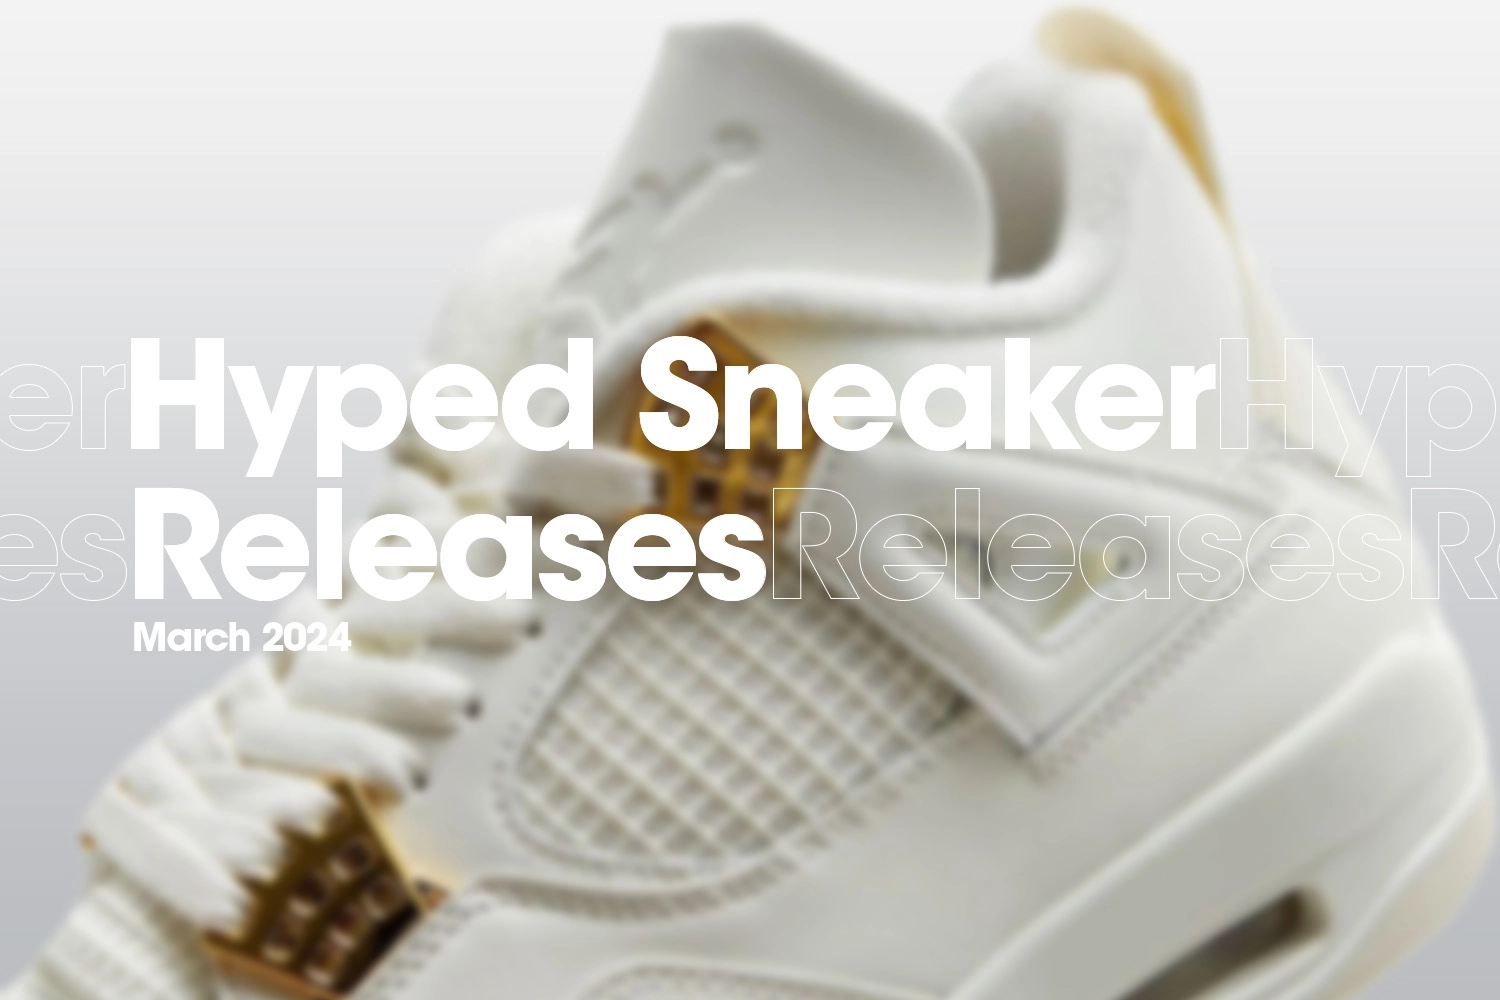 Hyped Sneaker Releases im März 2024